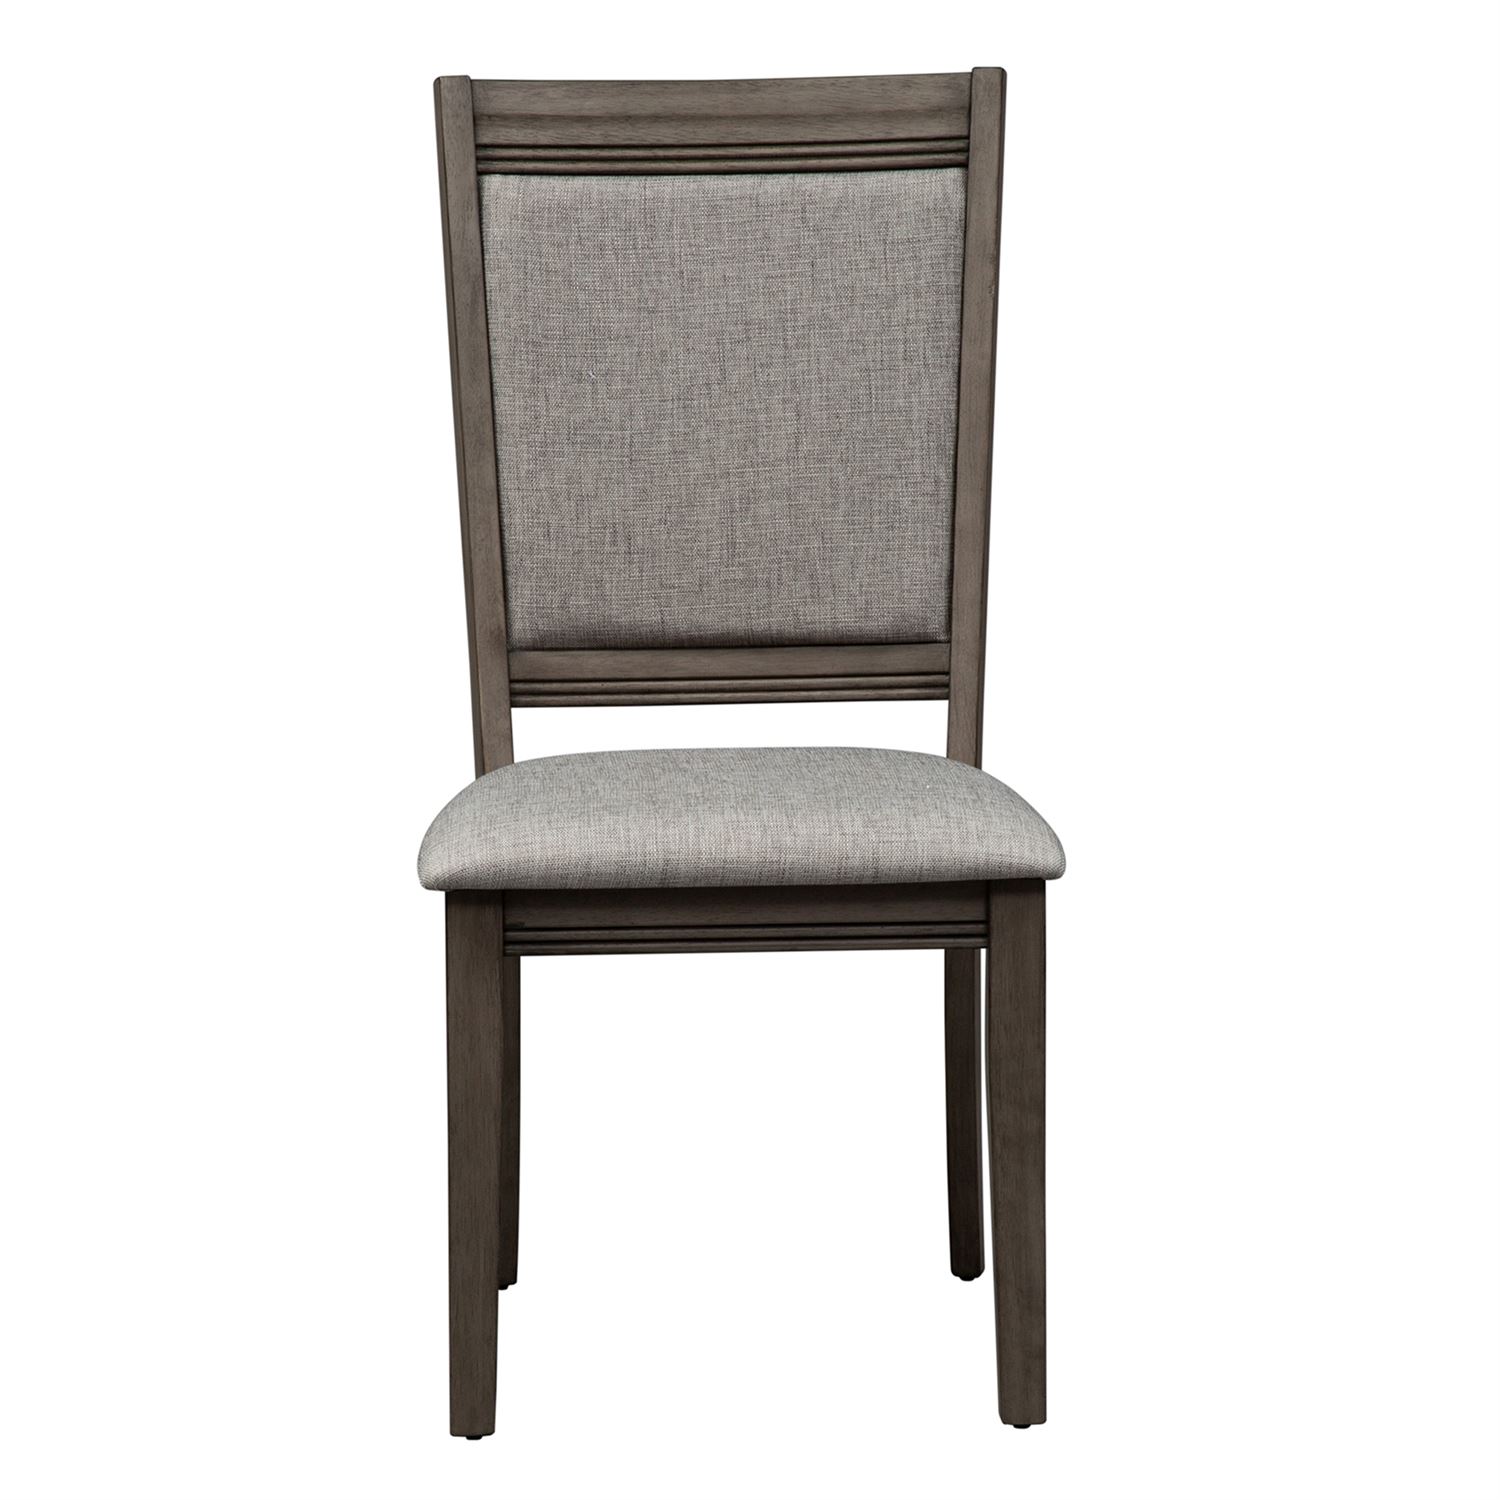 Tanners Creek opt 3 piece drop down table set